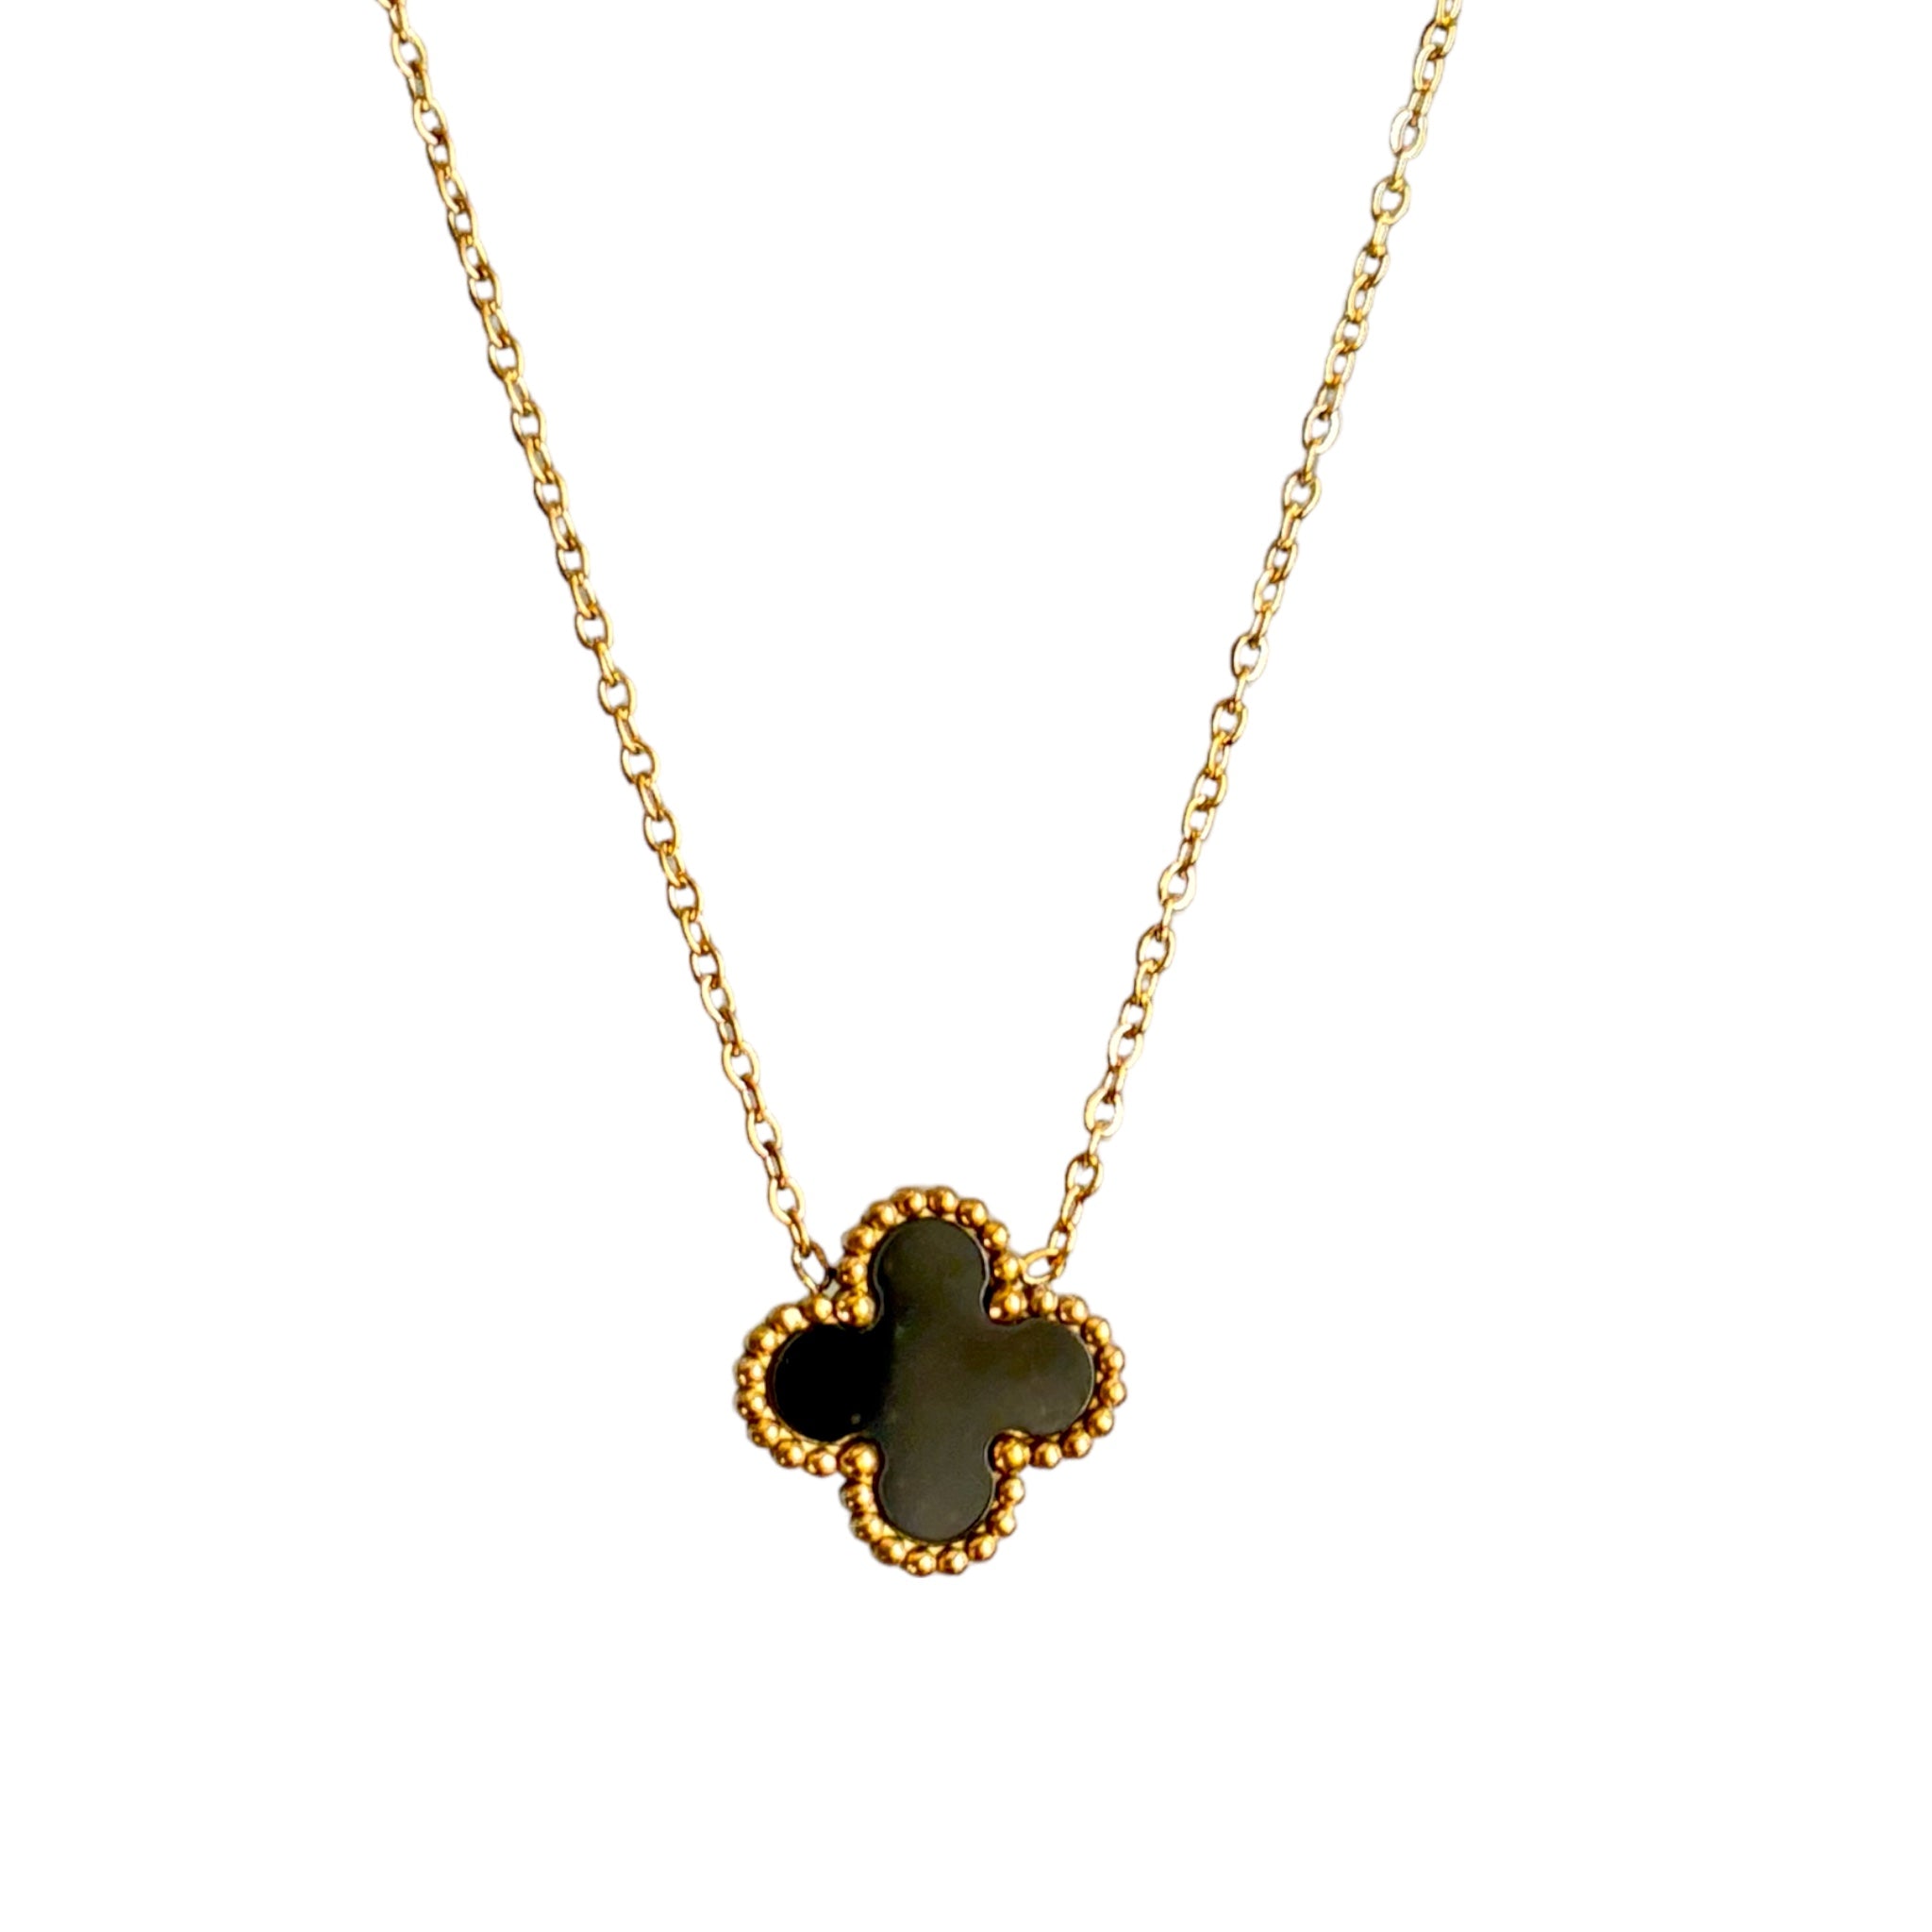 Designer Four Leaf Clover Four Leaf Clover Necklace With S925 Silver Screen  And Red Accents Multi Wear Double Sided Diamond Clover Pendant For  Girlfriend In Black And White From Henryjewelrys, $35.54 |